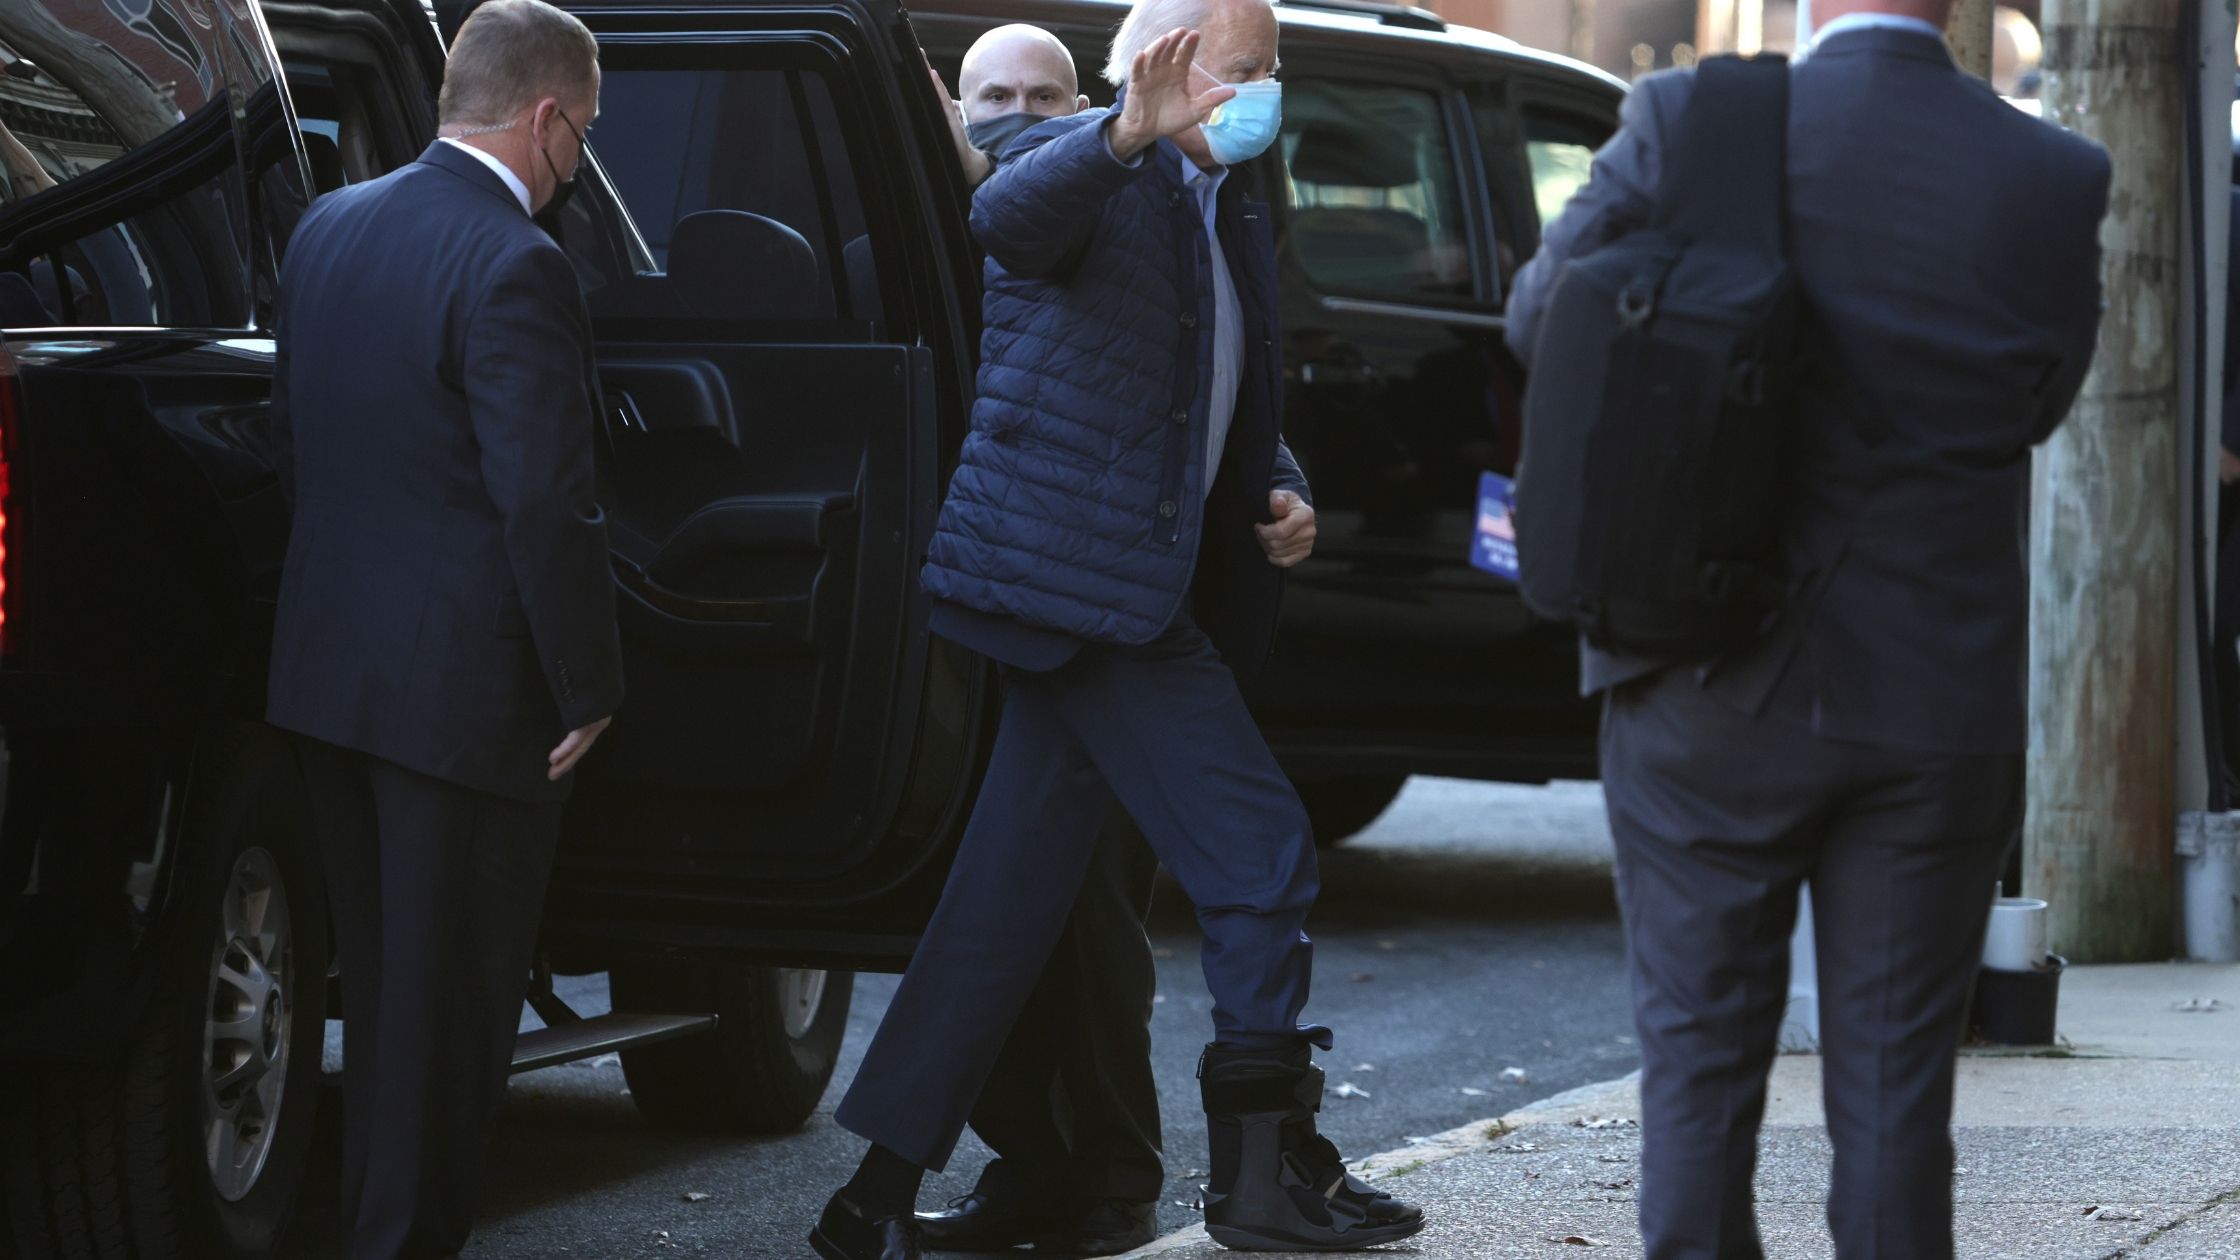 U.S. presumptive President-elect Joe Biden waves as he arrives for a virtual roundtable with workers and small business owners at The Queen Theatre on December 2, 2020, in Wilmington, Delaware.